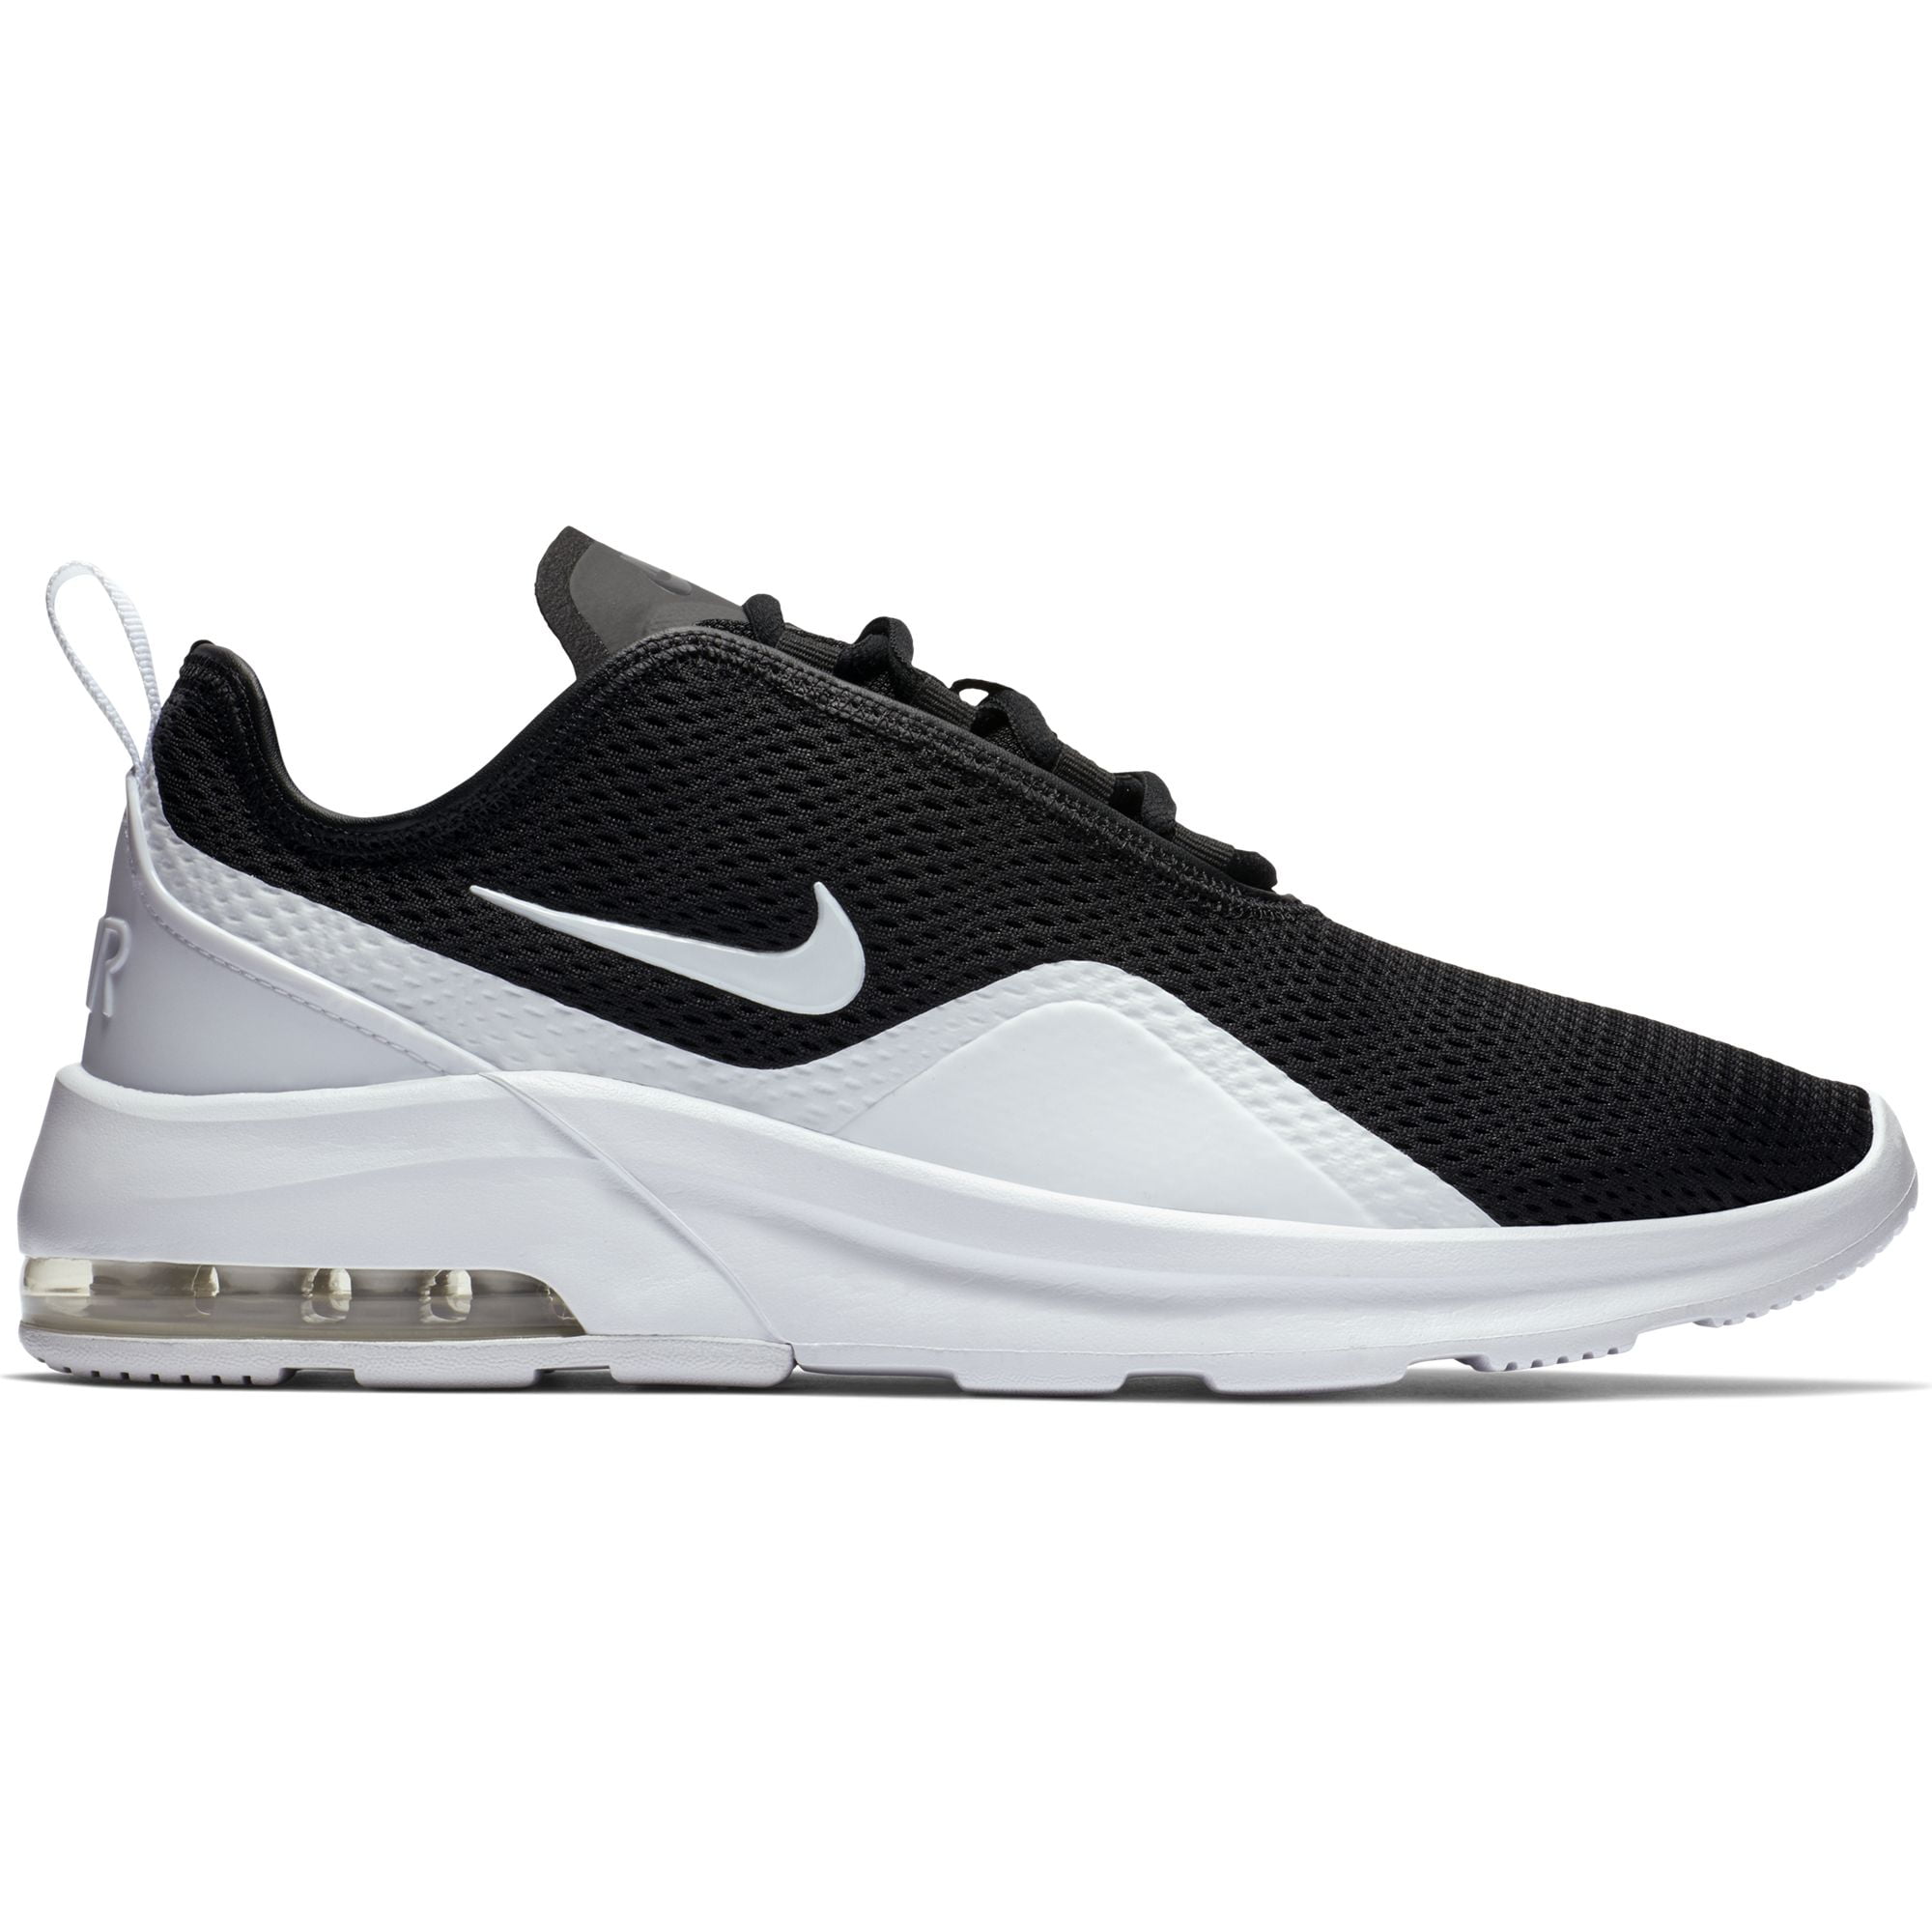 nike men's air max motion lifestyle shoes